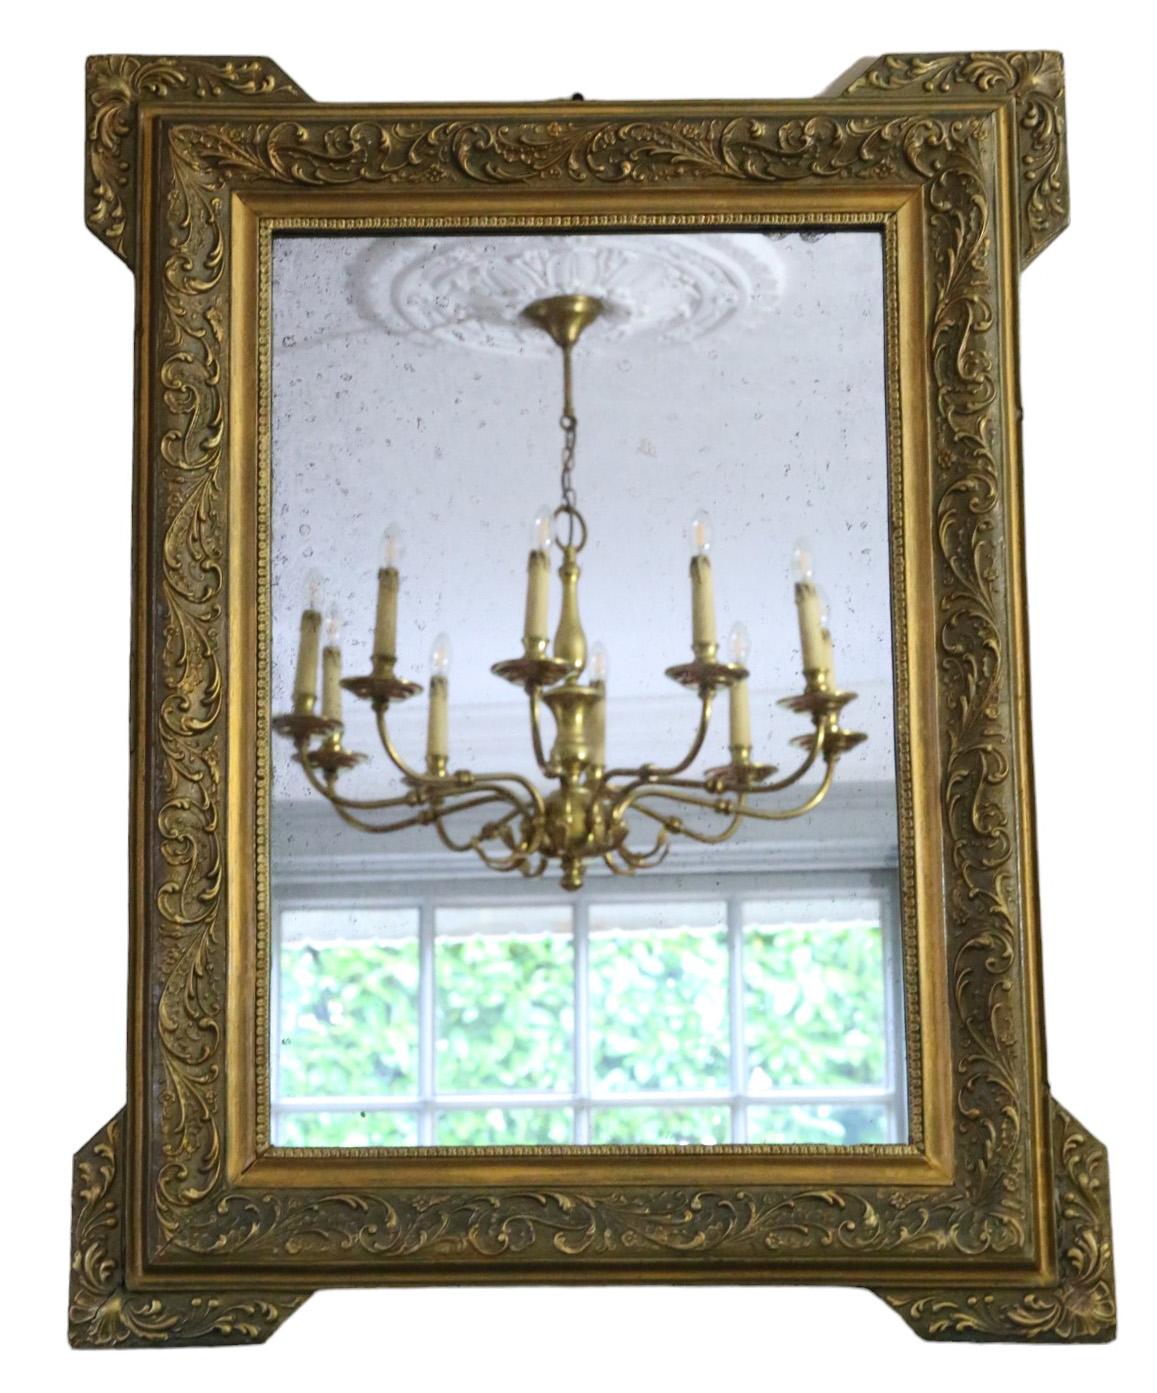 Antique C1900 large gilt overmantle wall mirror of fine quality, adorned with a decorative foliate design.

This mirror captivates with its simple yet striking design, lending character to any suitable space. The frame is free from loose